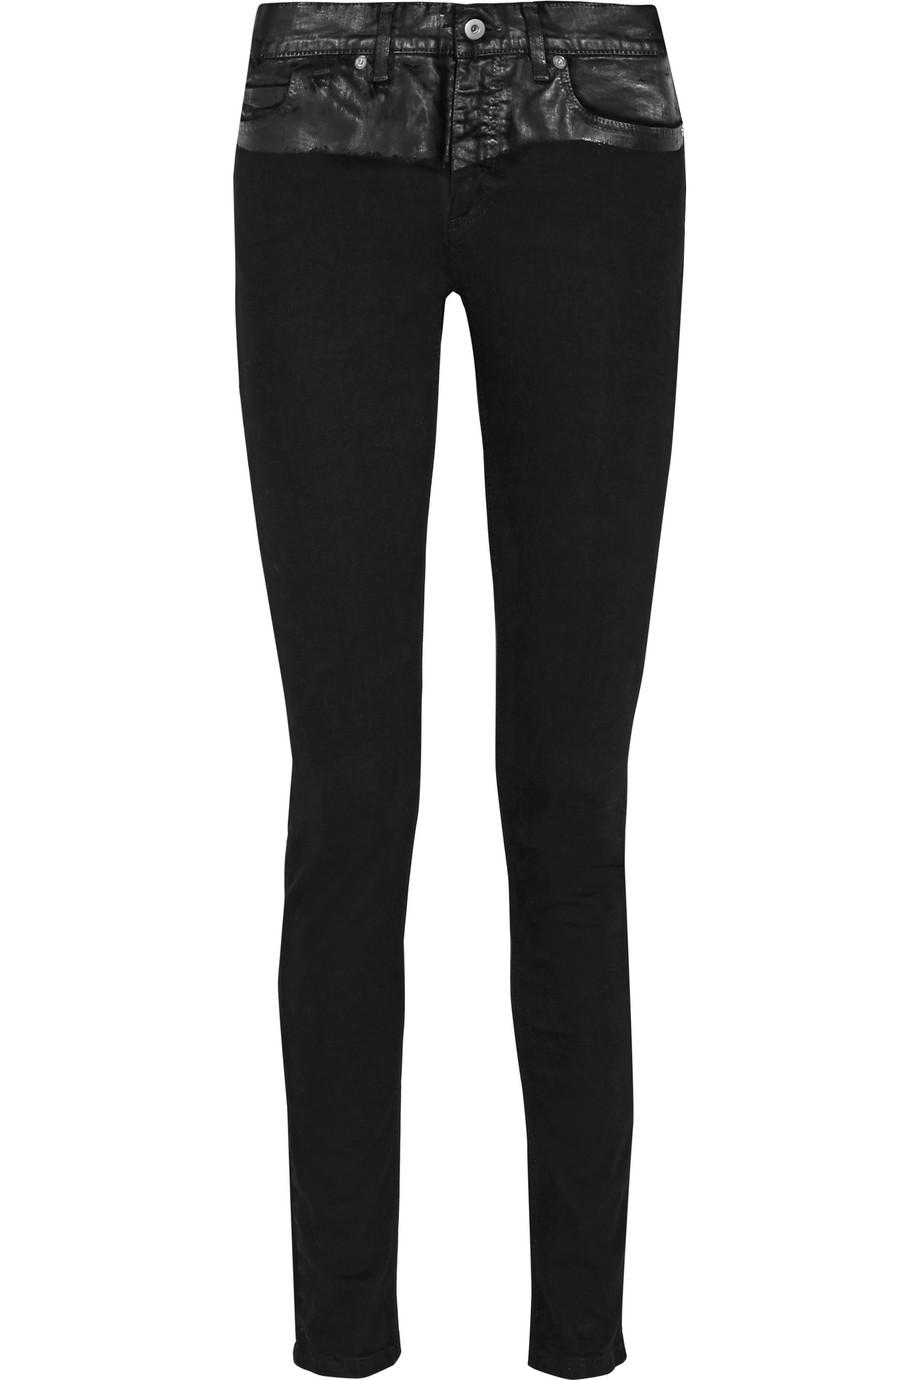 Mcq By Alexander Mcqueen Coated Mid-rise Skinny Jeans | ModeSens